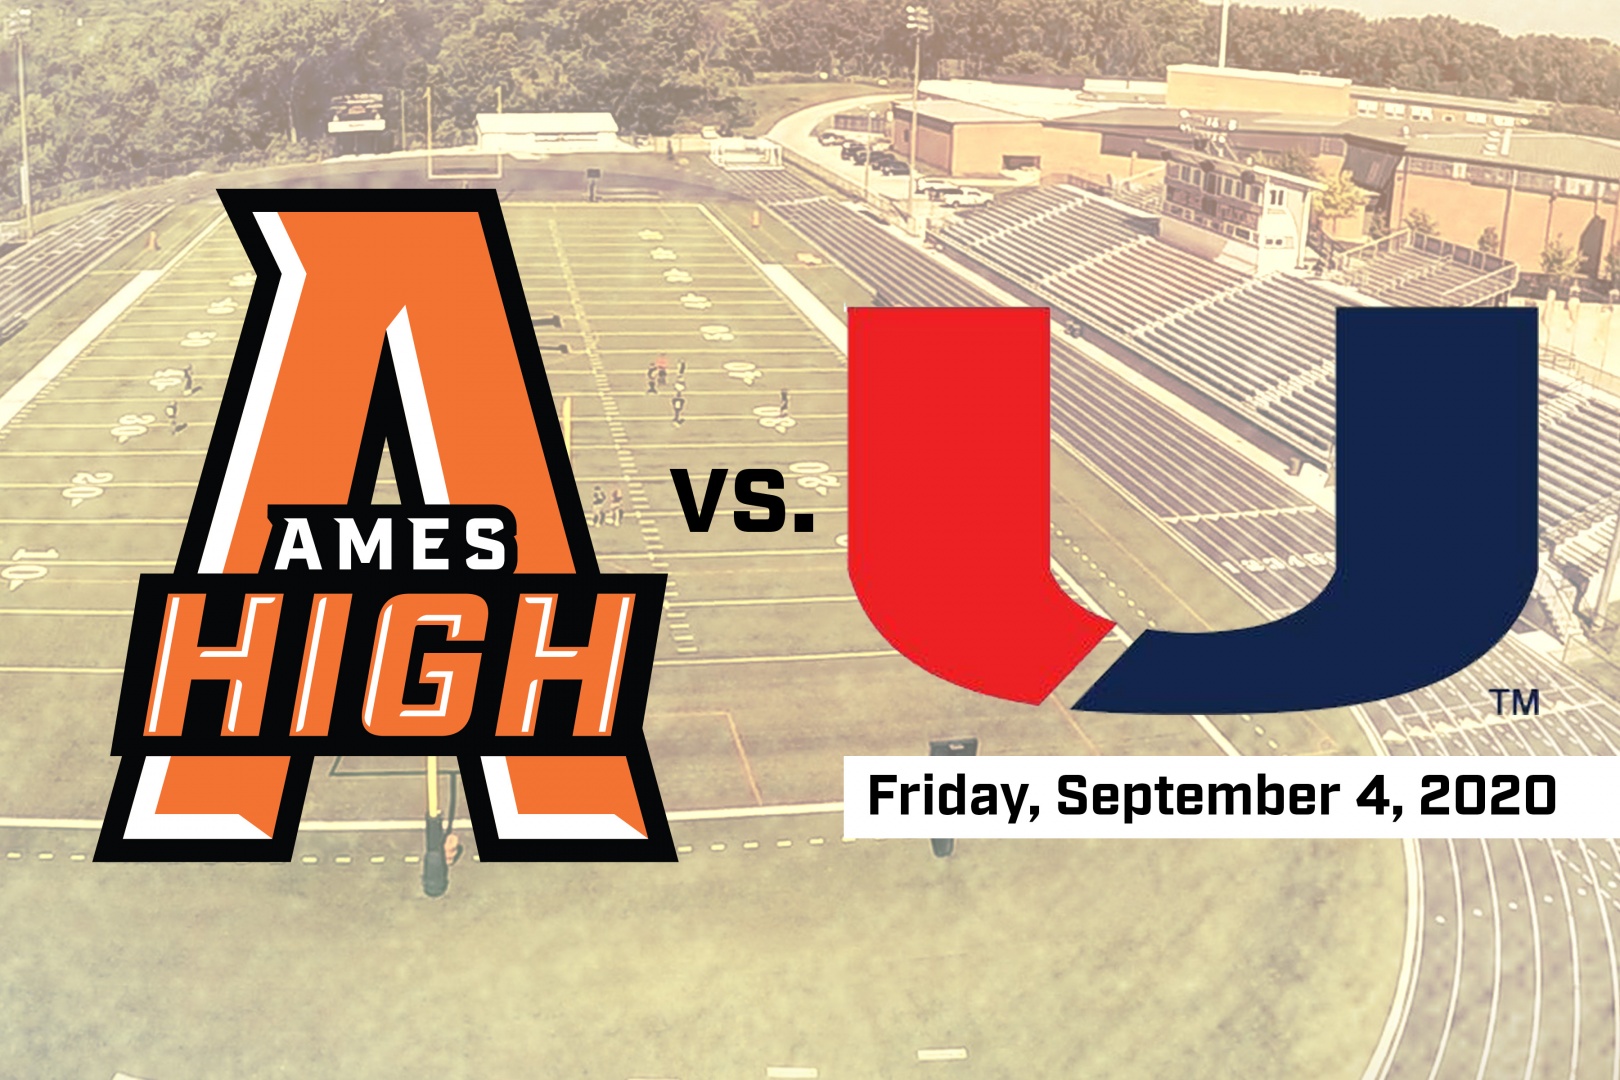 Ames High will Compete Against Urbandale with No Crowd on Friday, September 4